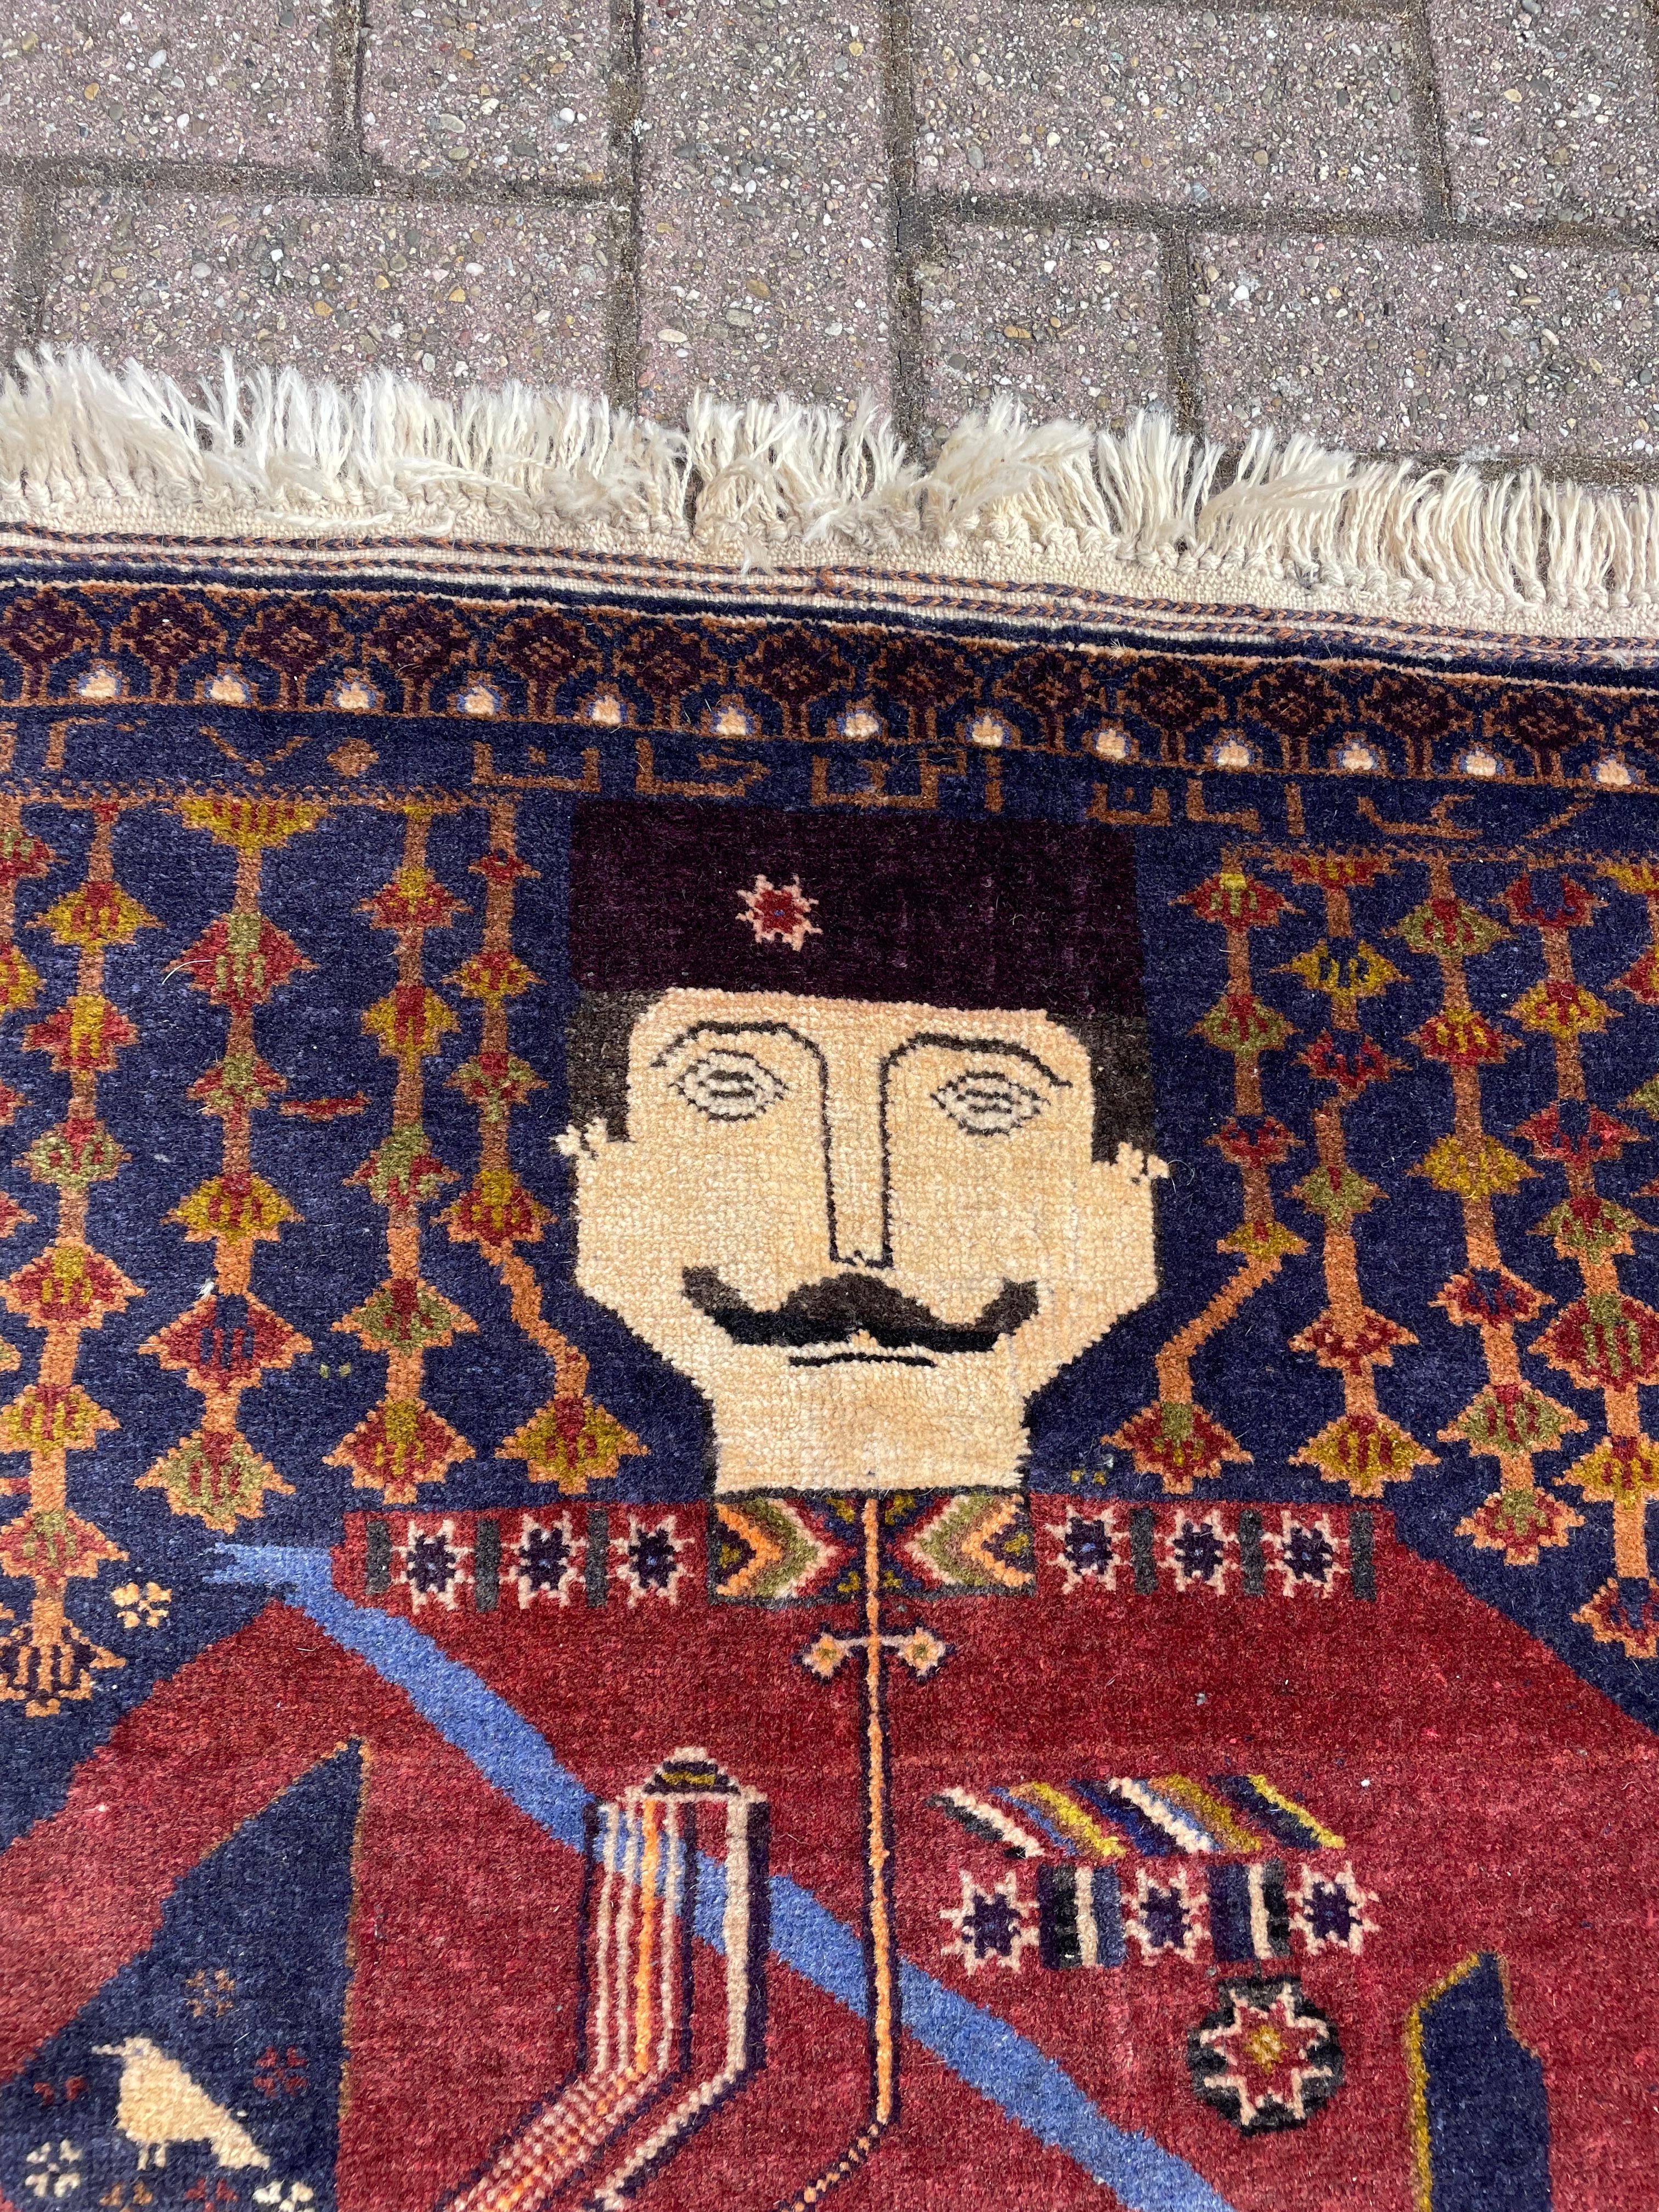 Rare Hand-Knotted War Rug Depicting Reign & King Amanullah Khan 1919 Afghanistan For Sale 3